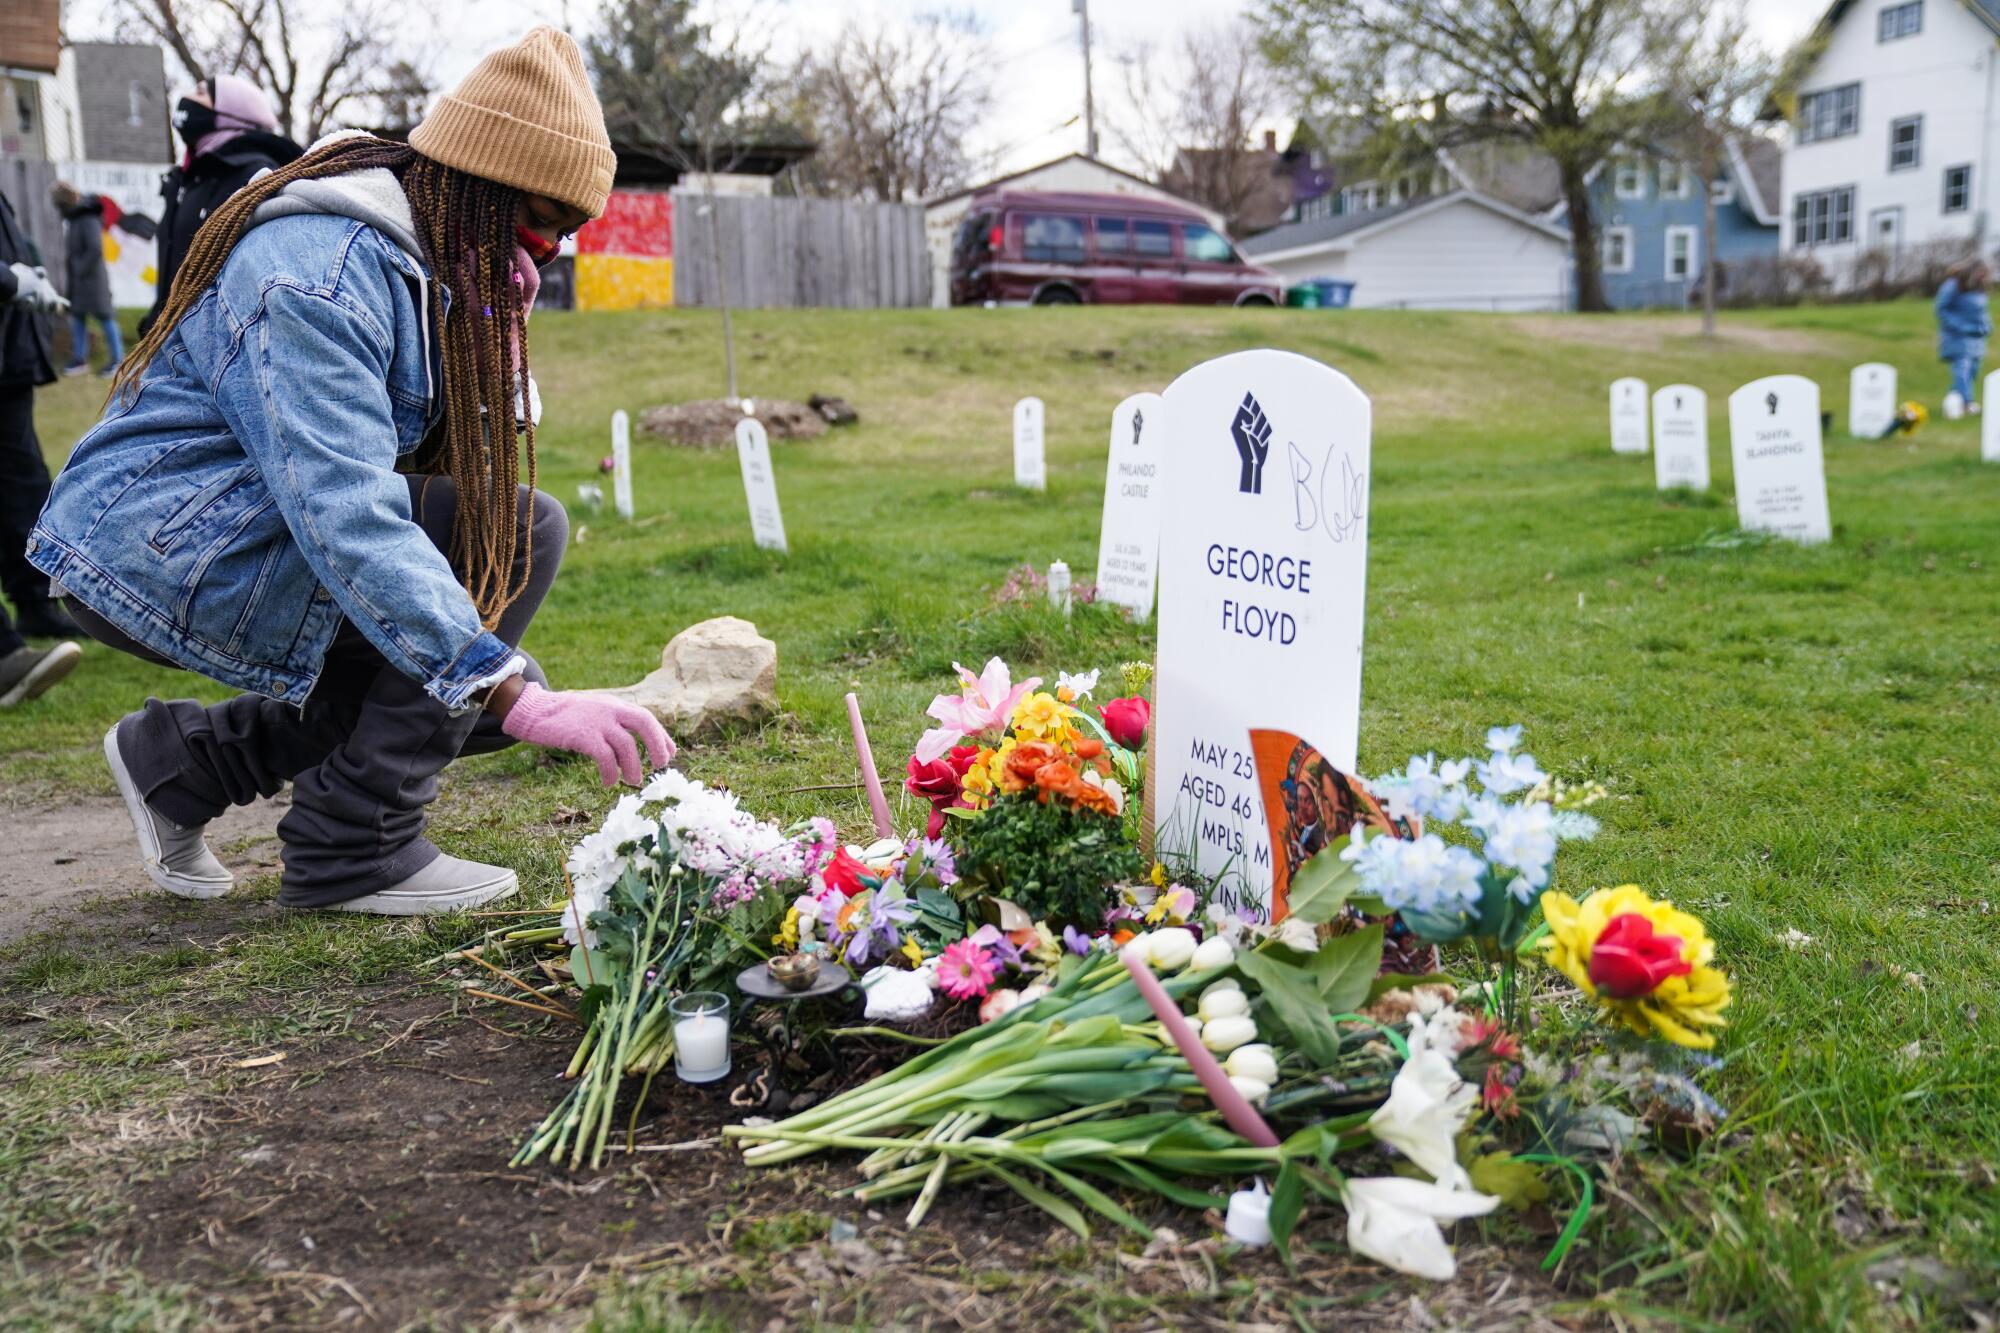 A woman lays flowers at a memorial